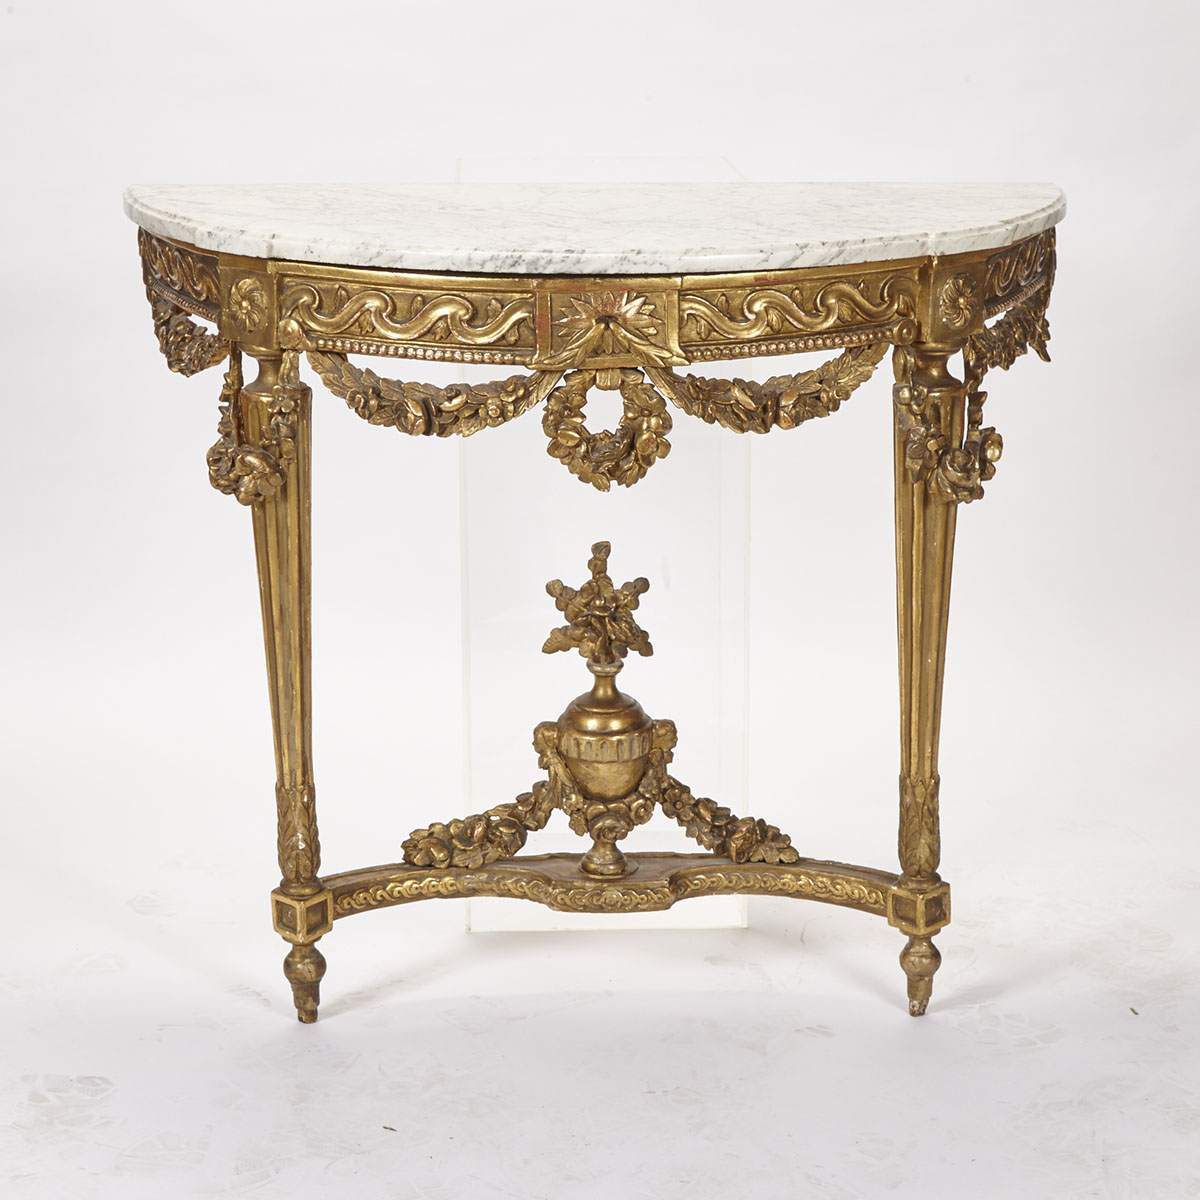 Italian Giltwood Demi Lune Console Table, early 20th century